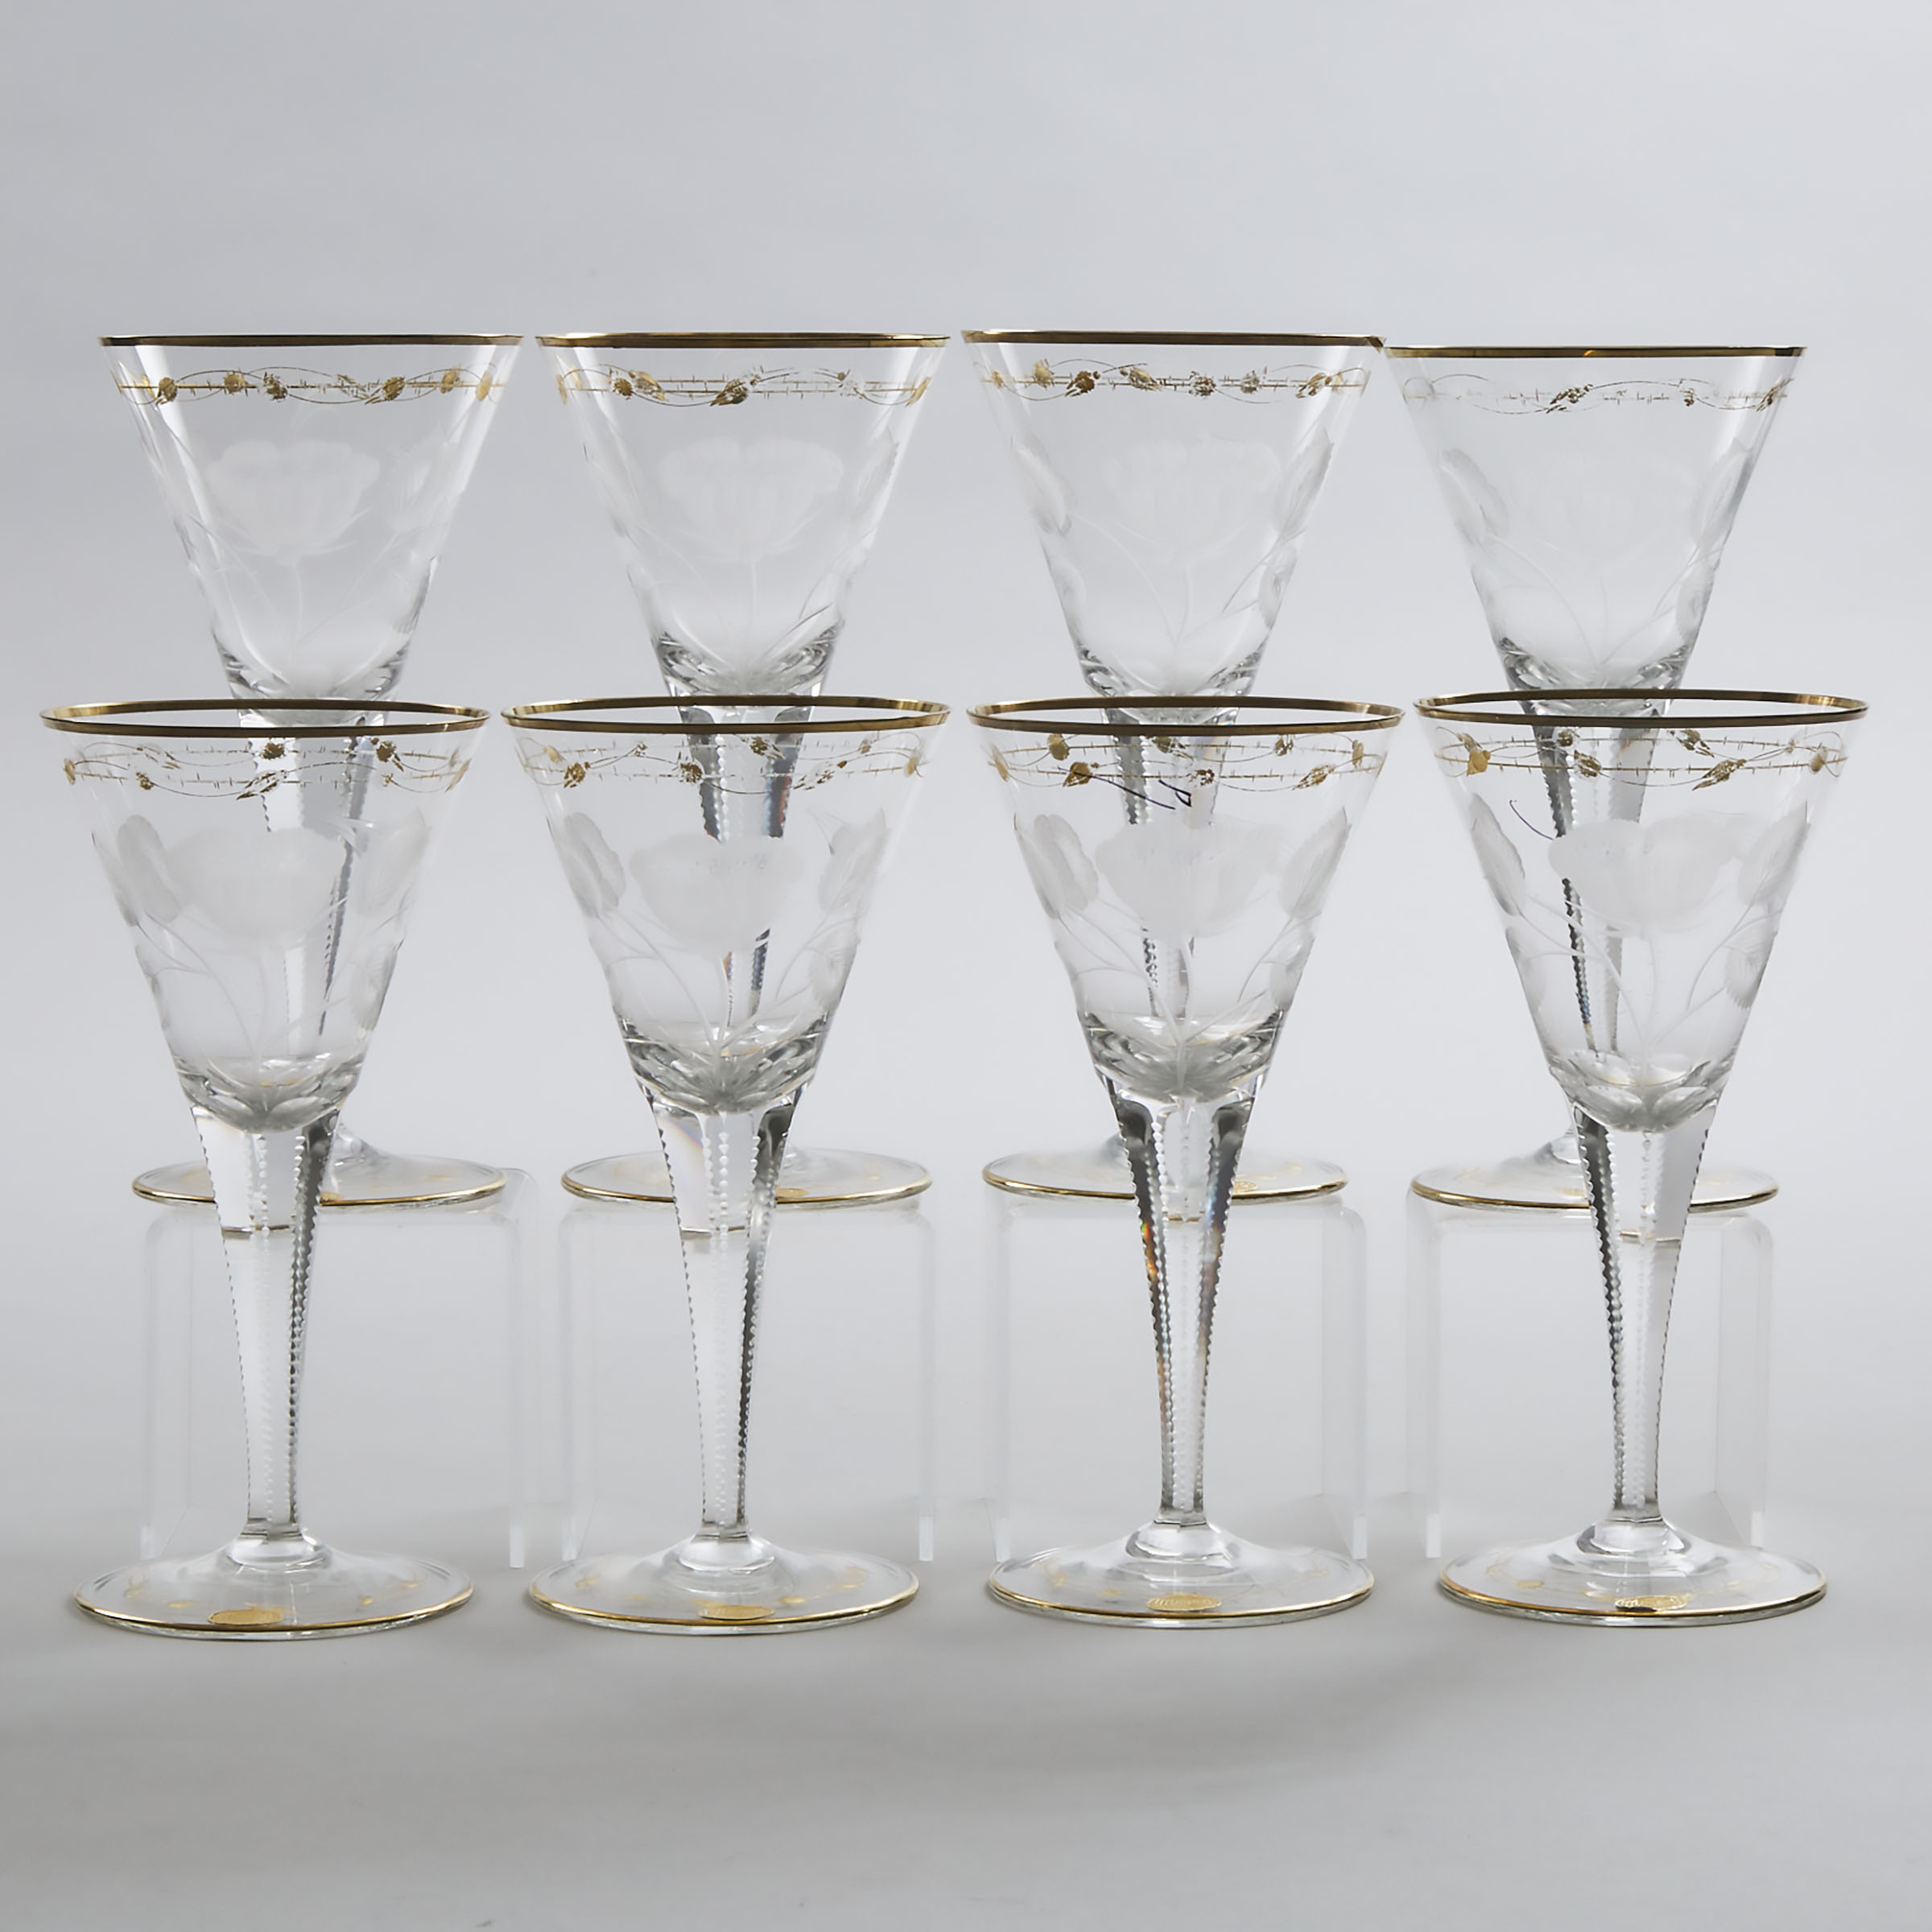 Eight Moser 'Paula' Etched and Gilt Glass Goblets, 20th century